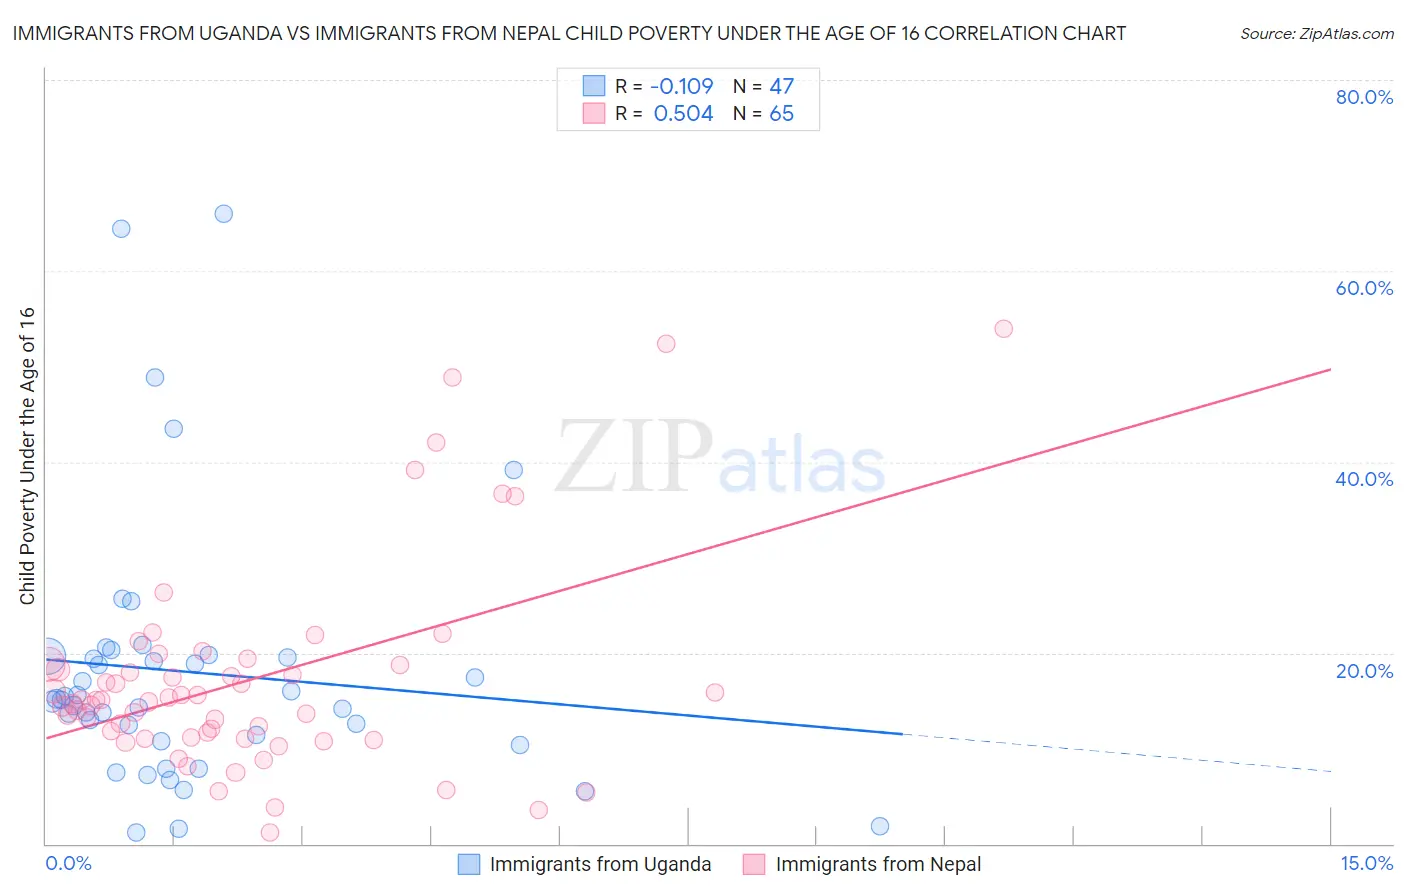 Immigrants from Uganda vs Immigrants from Nepal Child Poverty Under the Age of 16